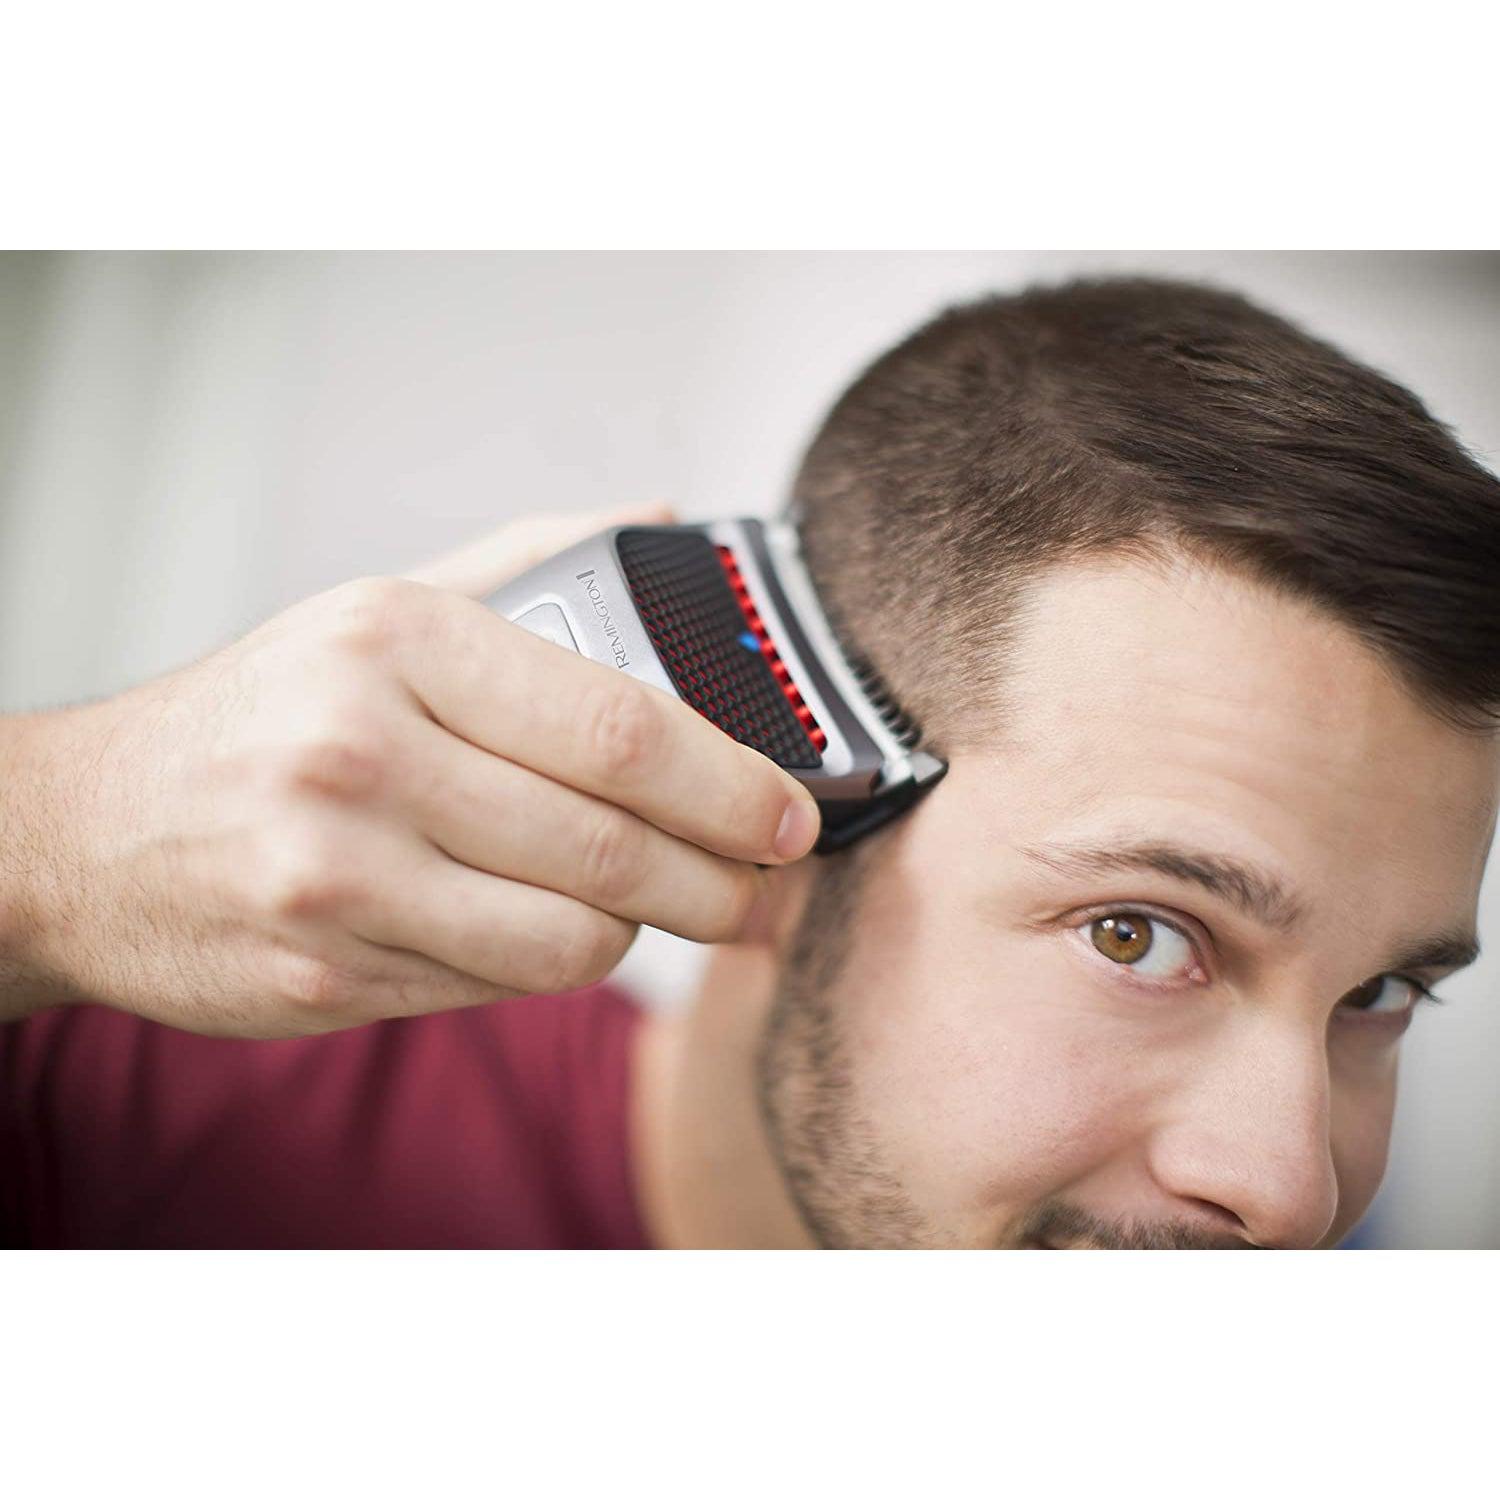 Remington Quick Cut Hair Clippers -9 Comb Lengths Curved Blade with Storage Pouch - HC4250, Black/Red - Healthxpress.ie